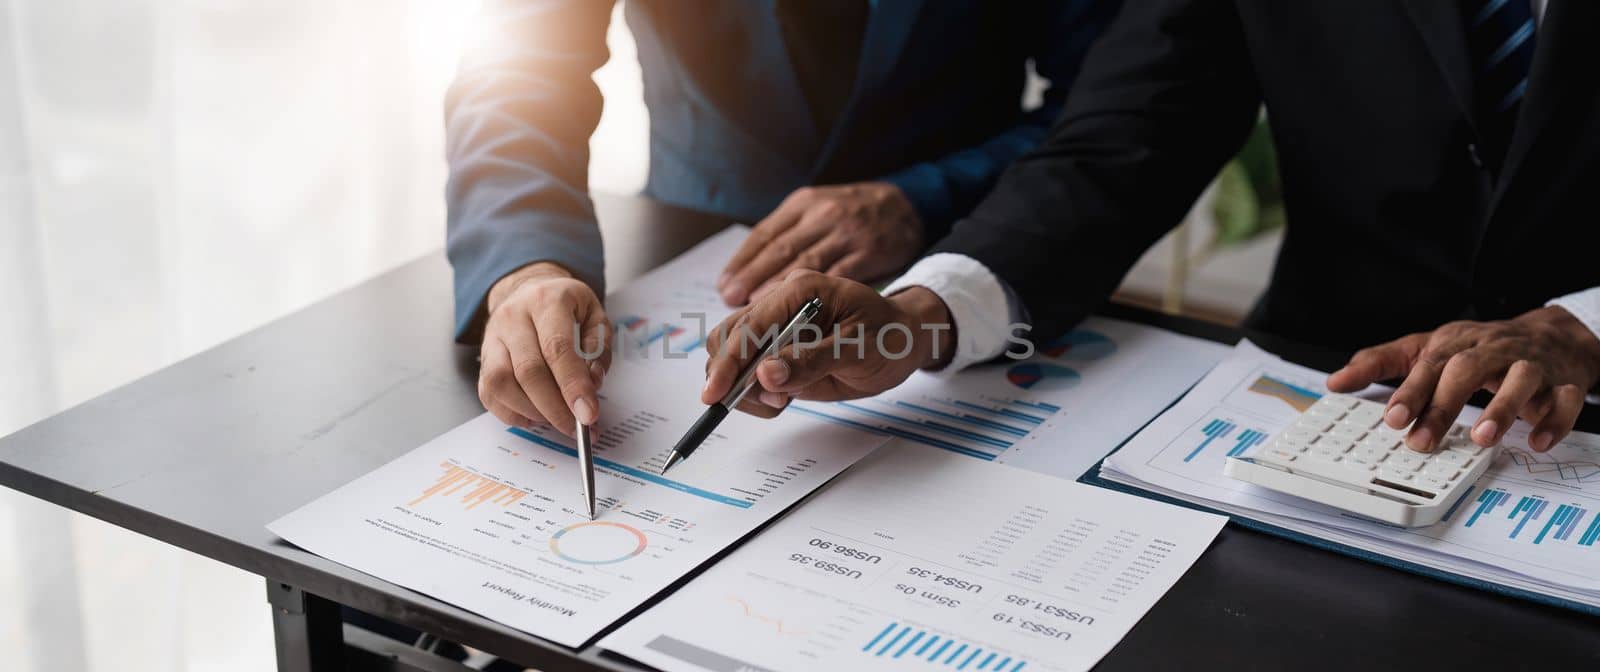 Business People Meeting using laptop computer,calculator,notebook,stock market chart paper for analysis Plans to improve quality next month. Conference Discussion Corporate Concept....